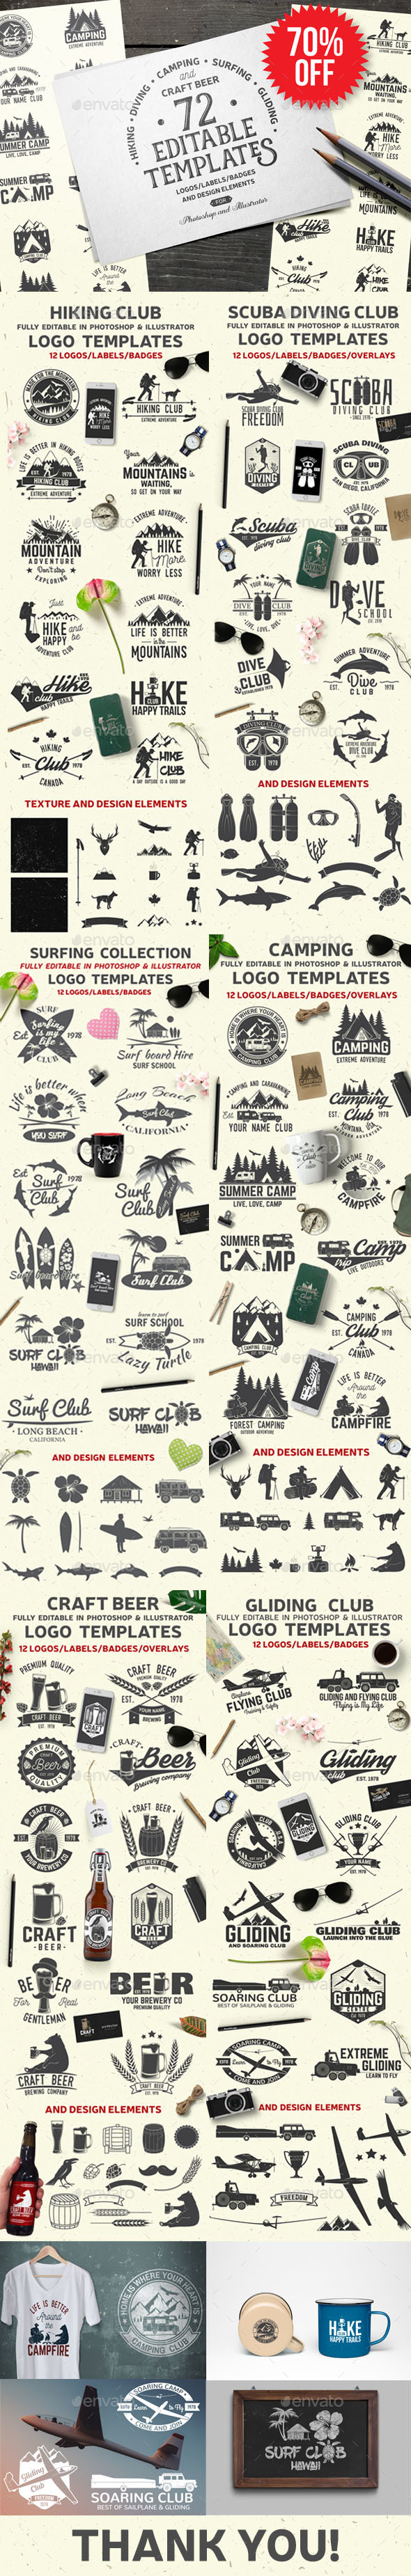 72 Badge Graphics in One Bundle